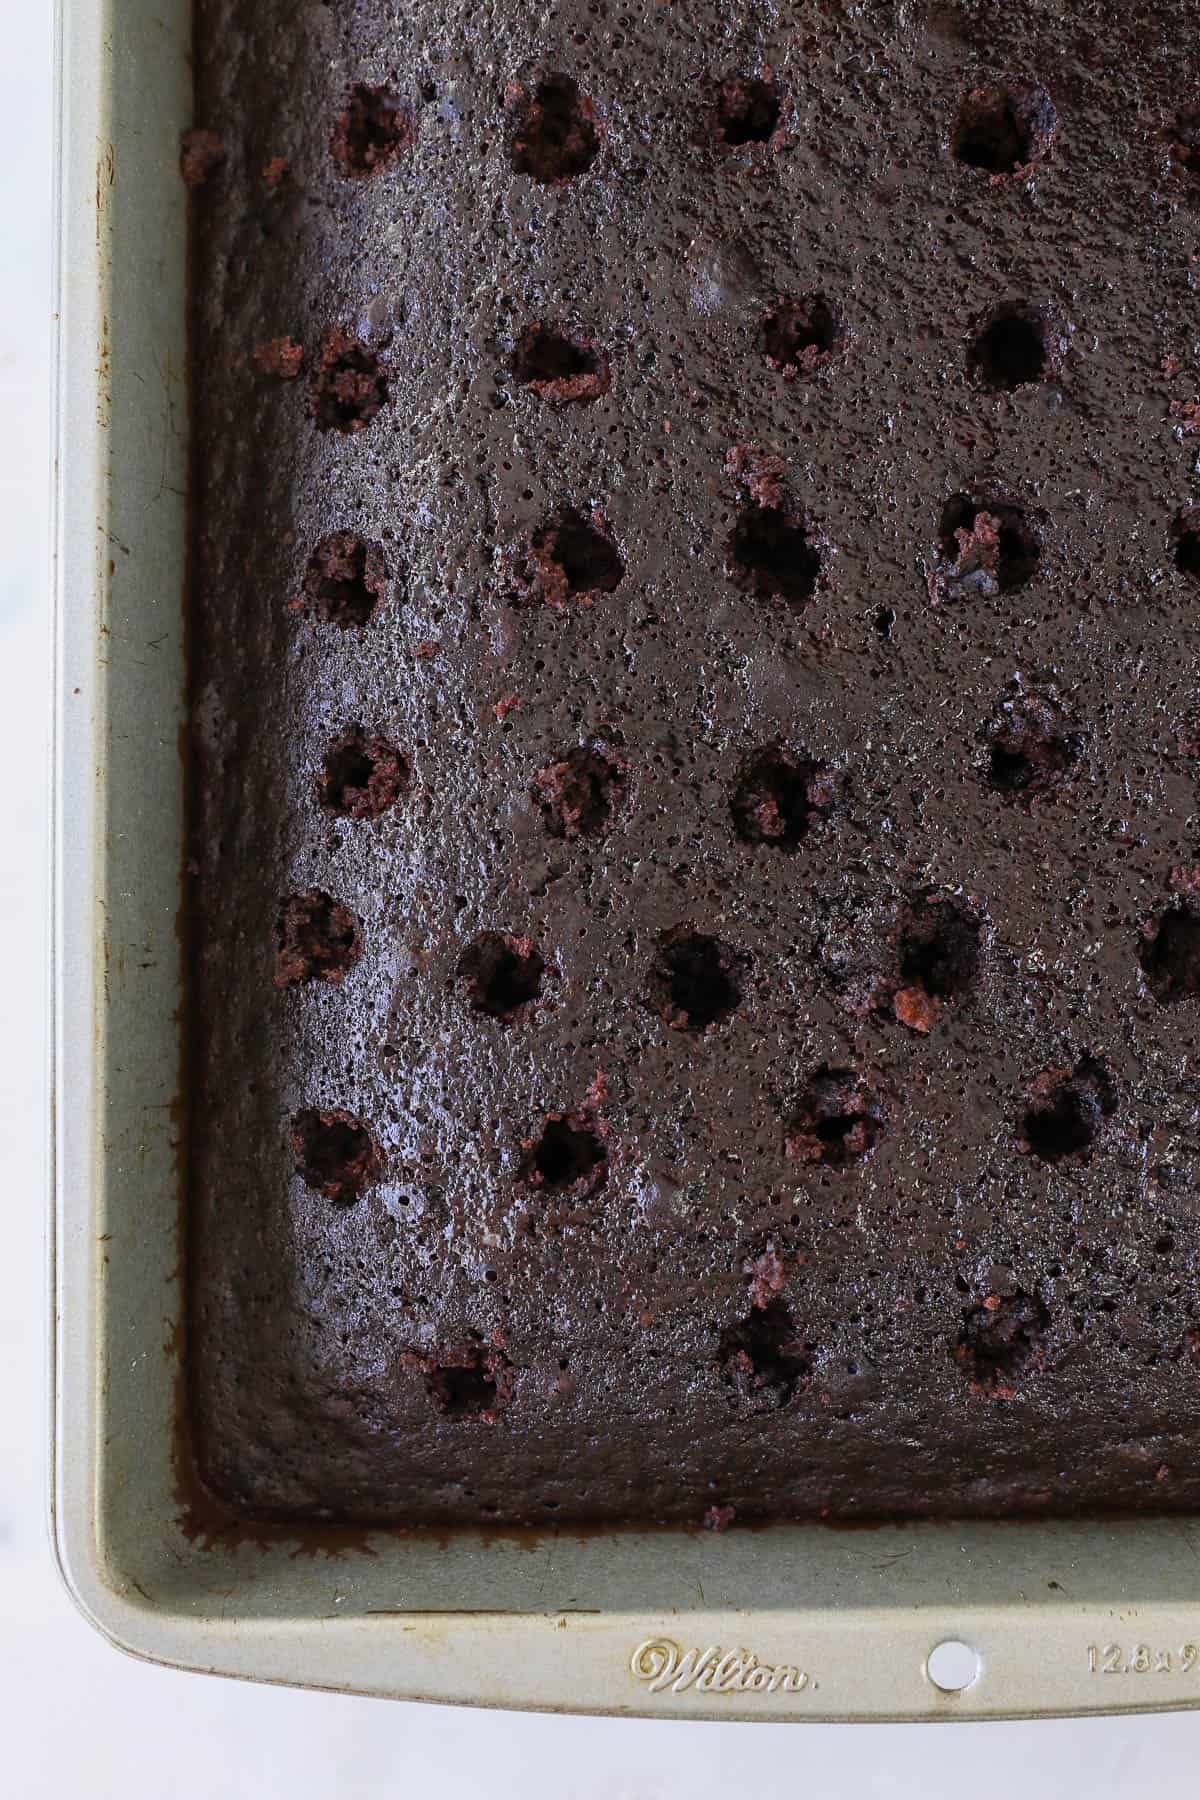 A close up of a chocolate cake with holes poked in it